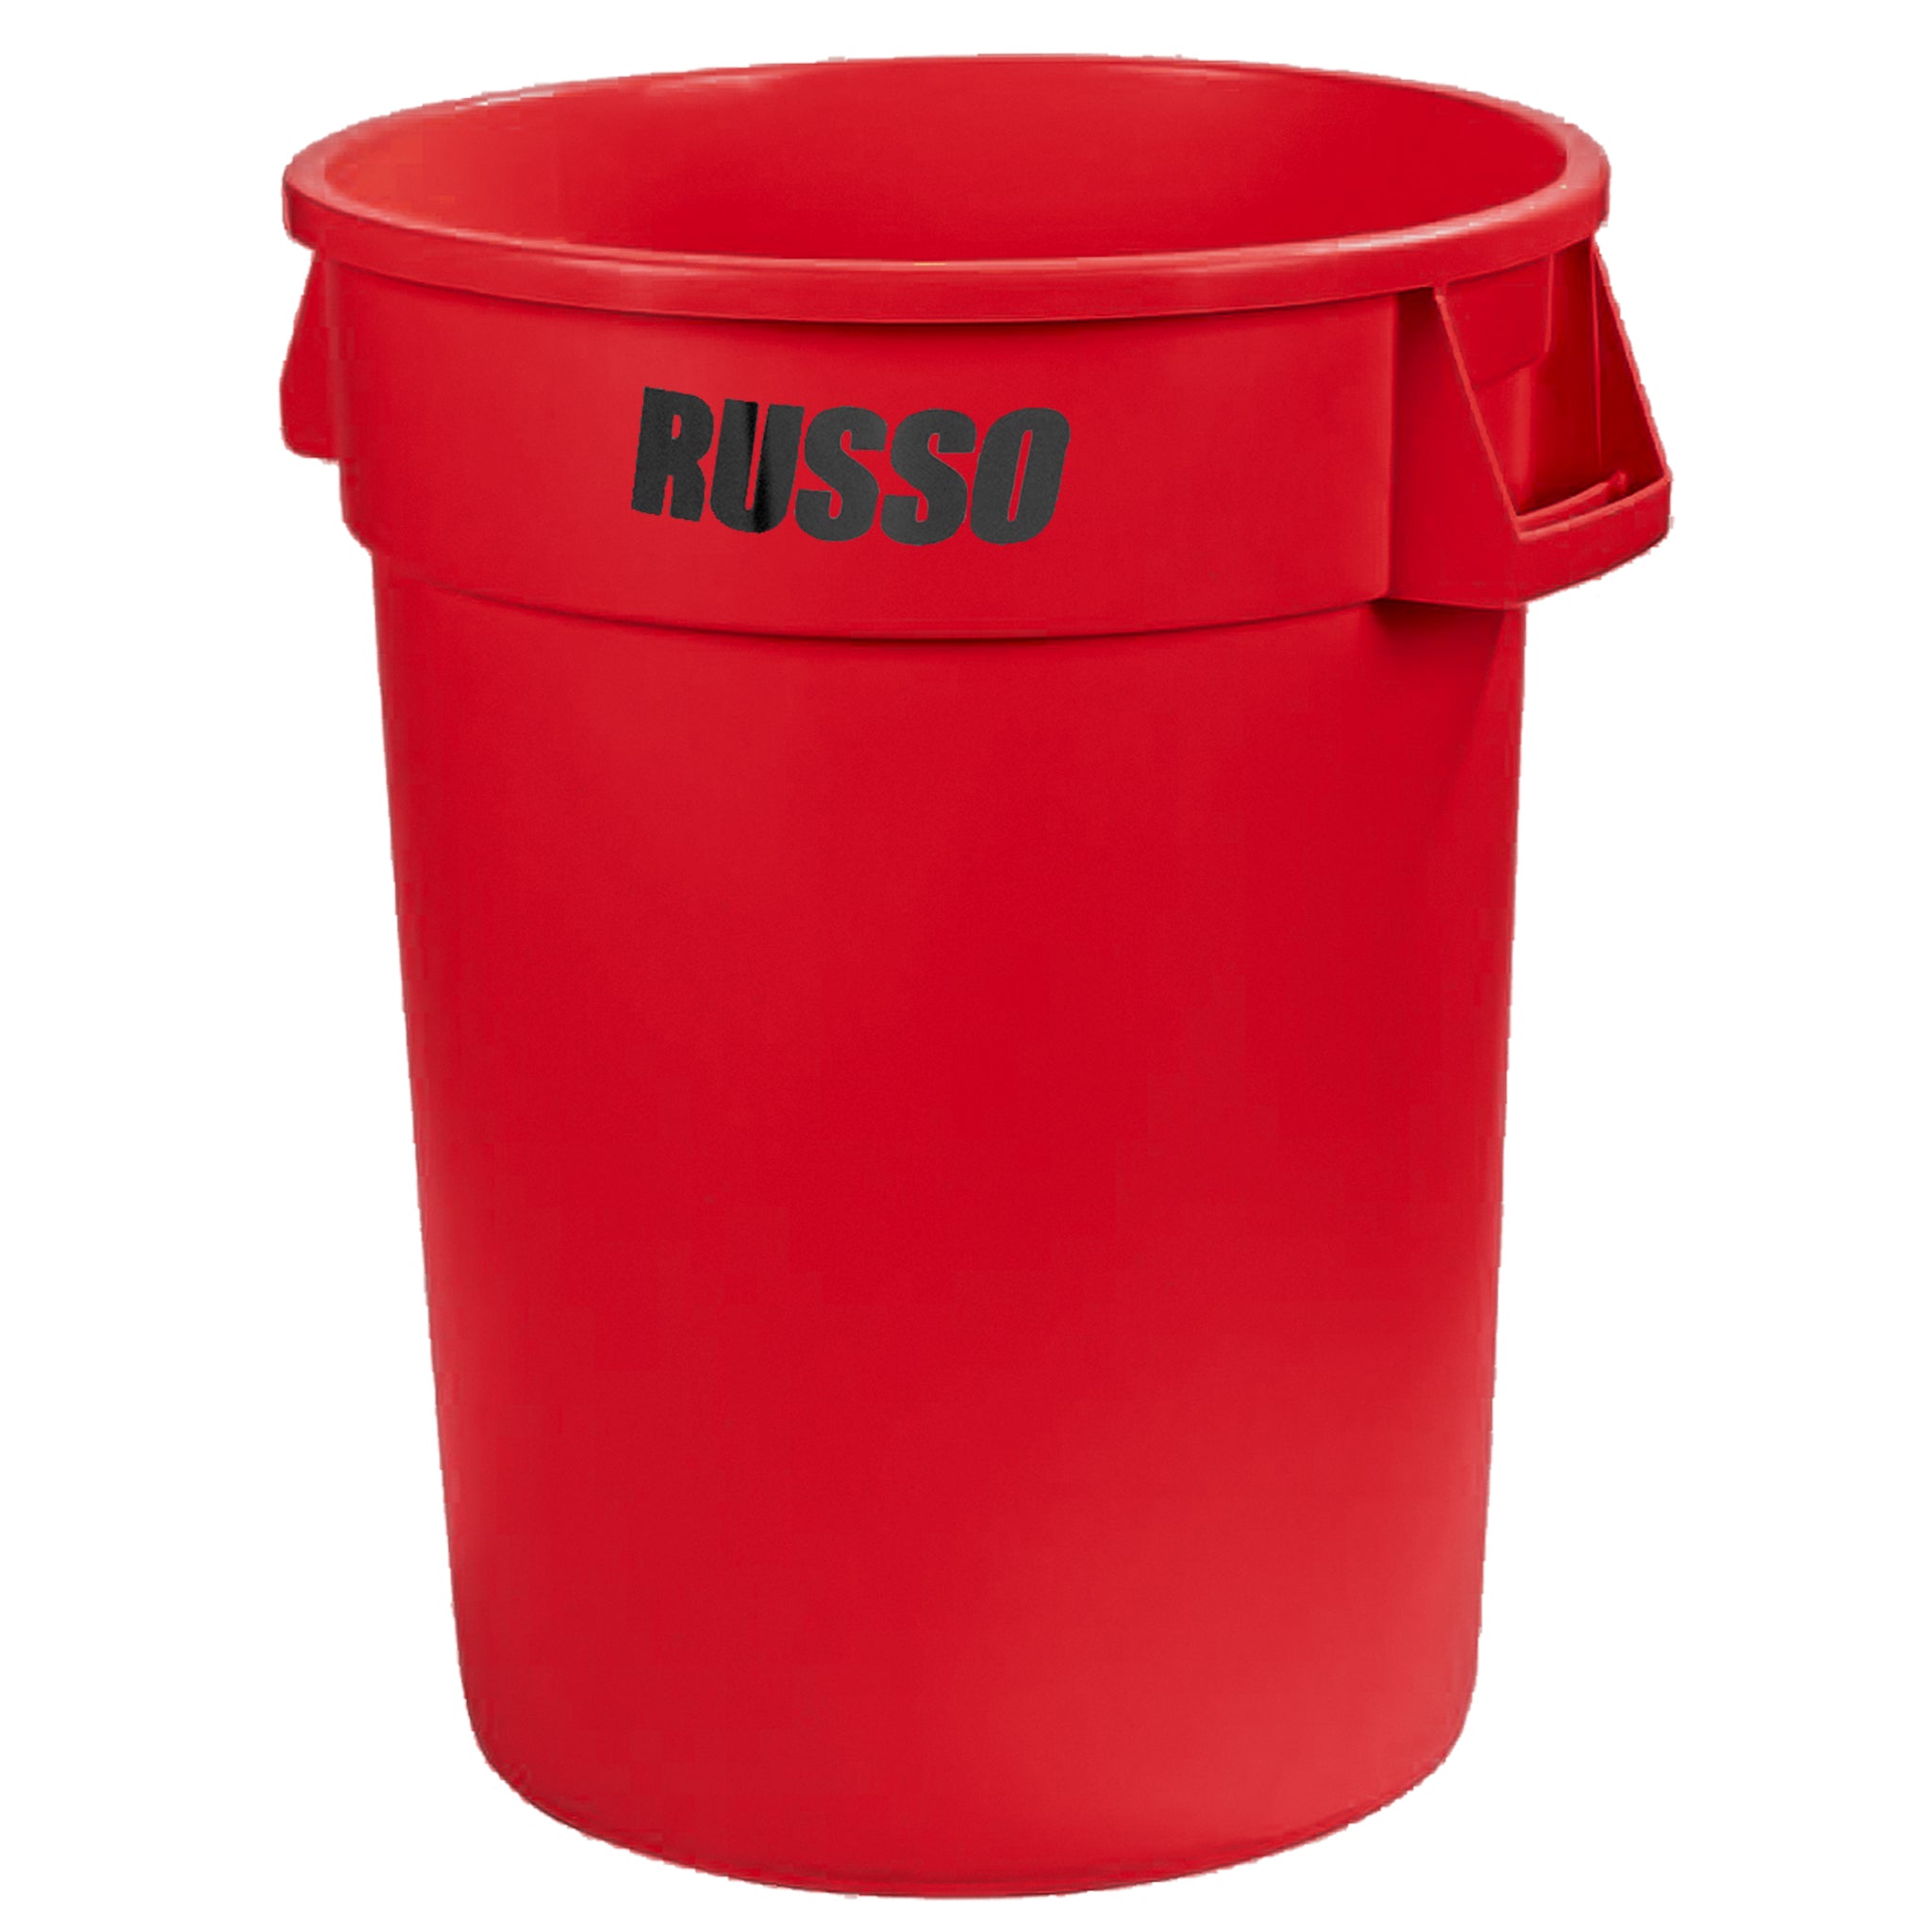 RUSSO 2643 Red Glow Can 44 Gallon